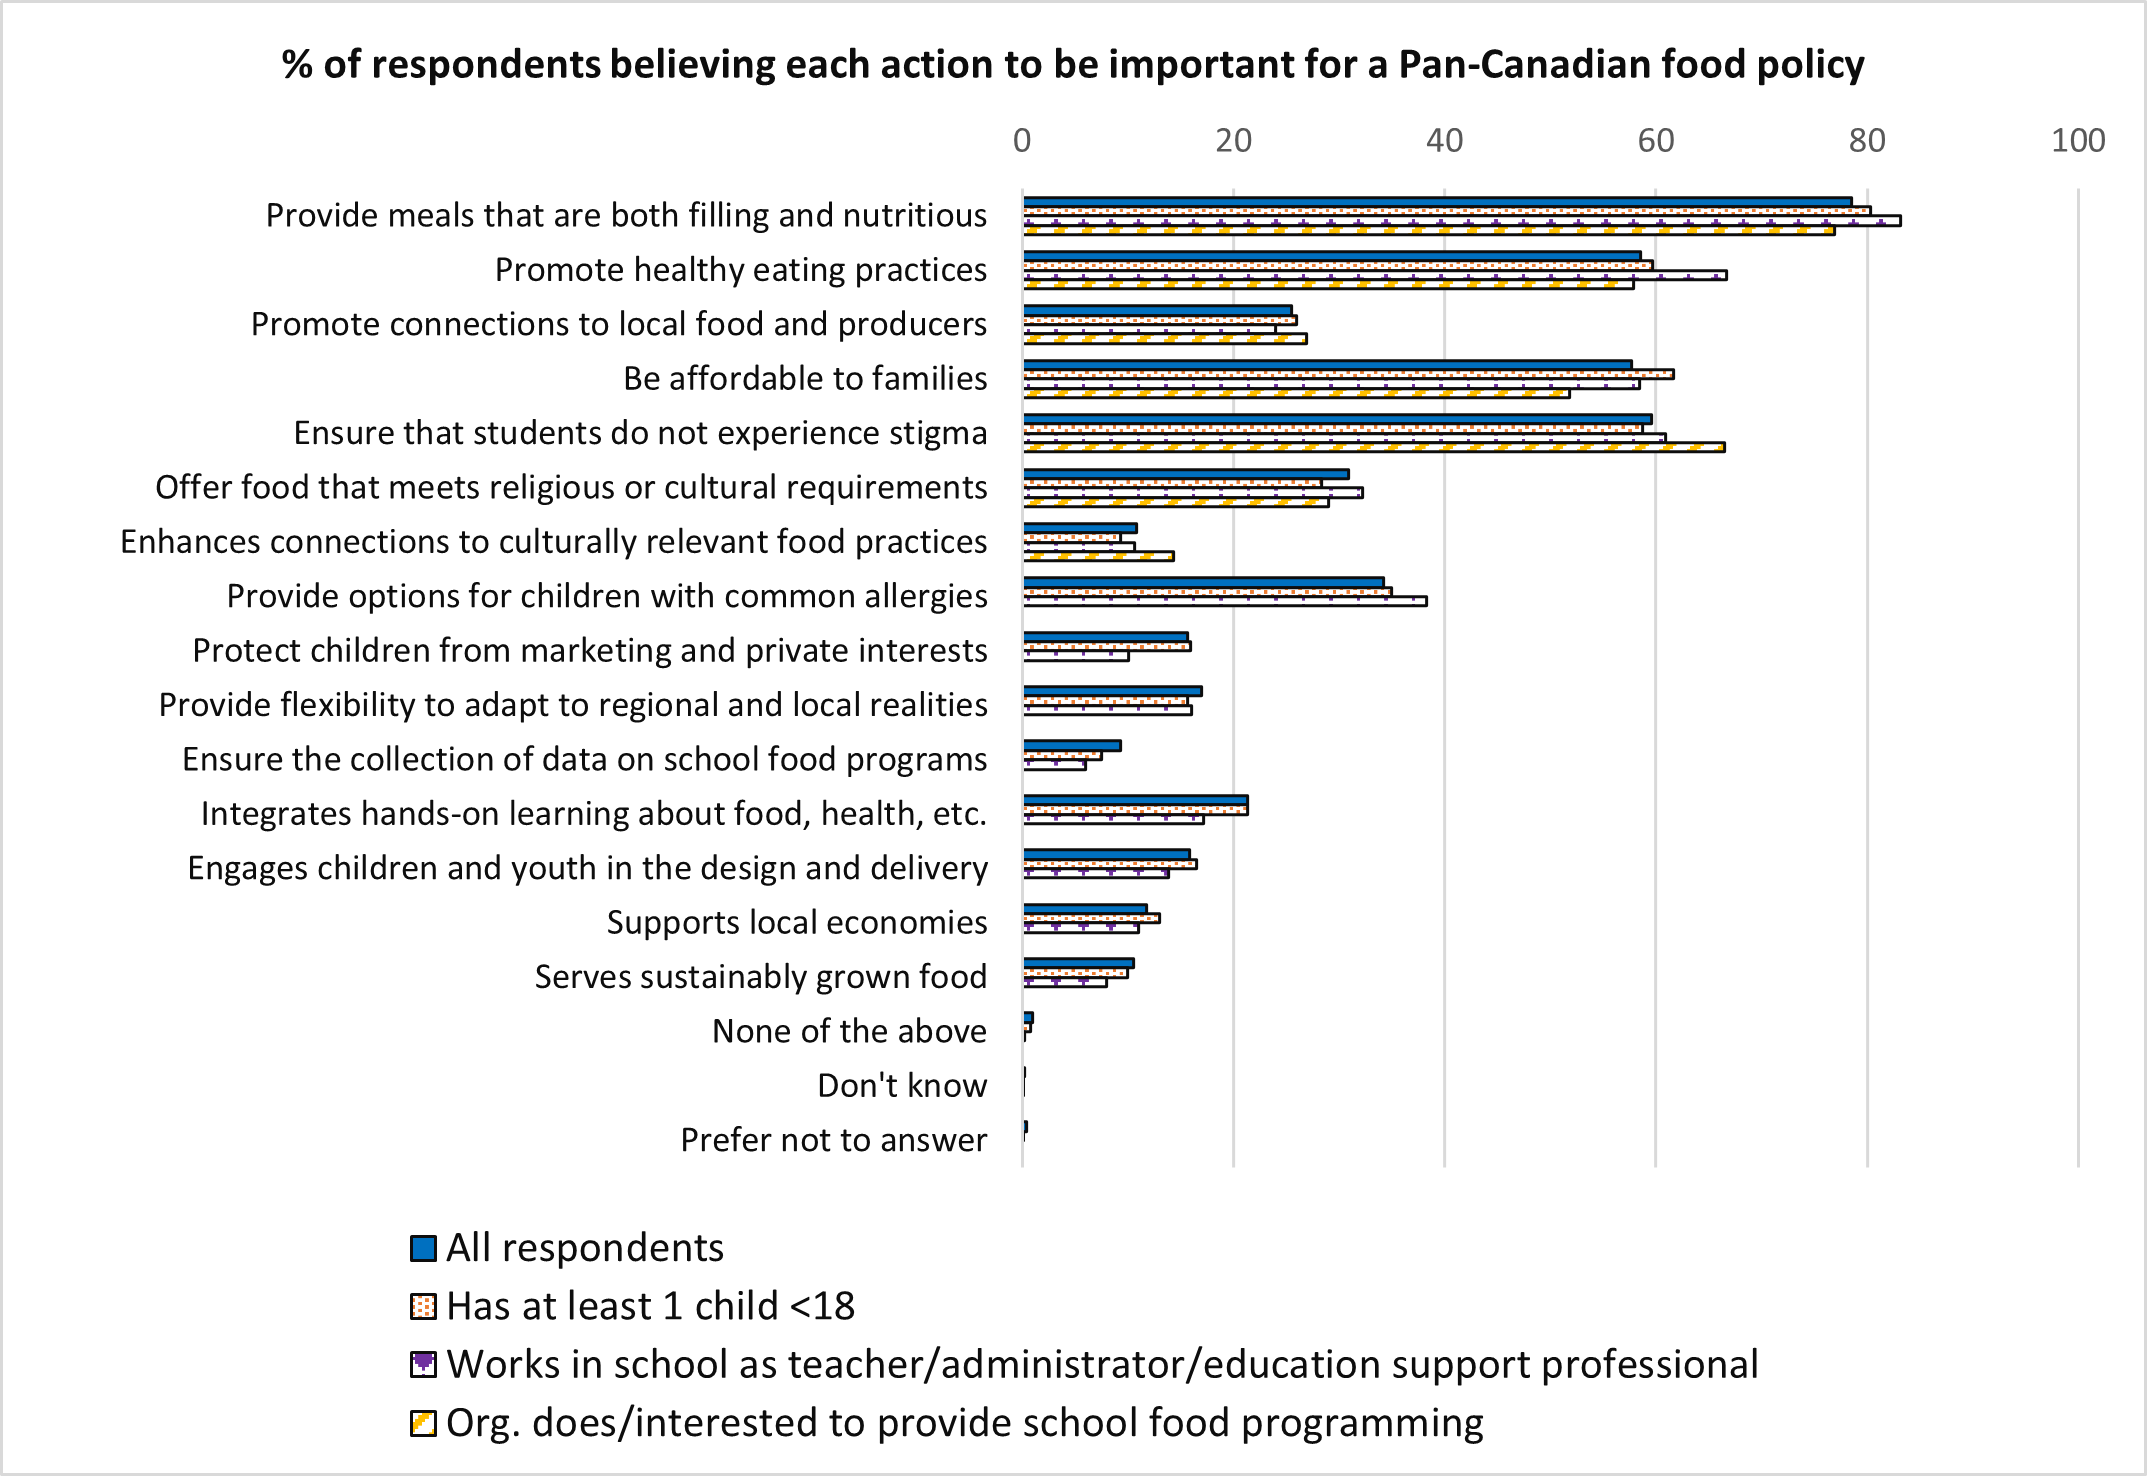 A bar chart of the percent of respondents believing each action to be important for a Pan-Canadian food policy. Text version below.